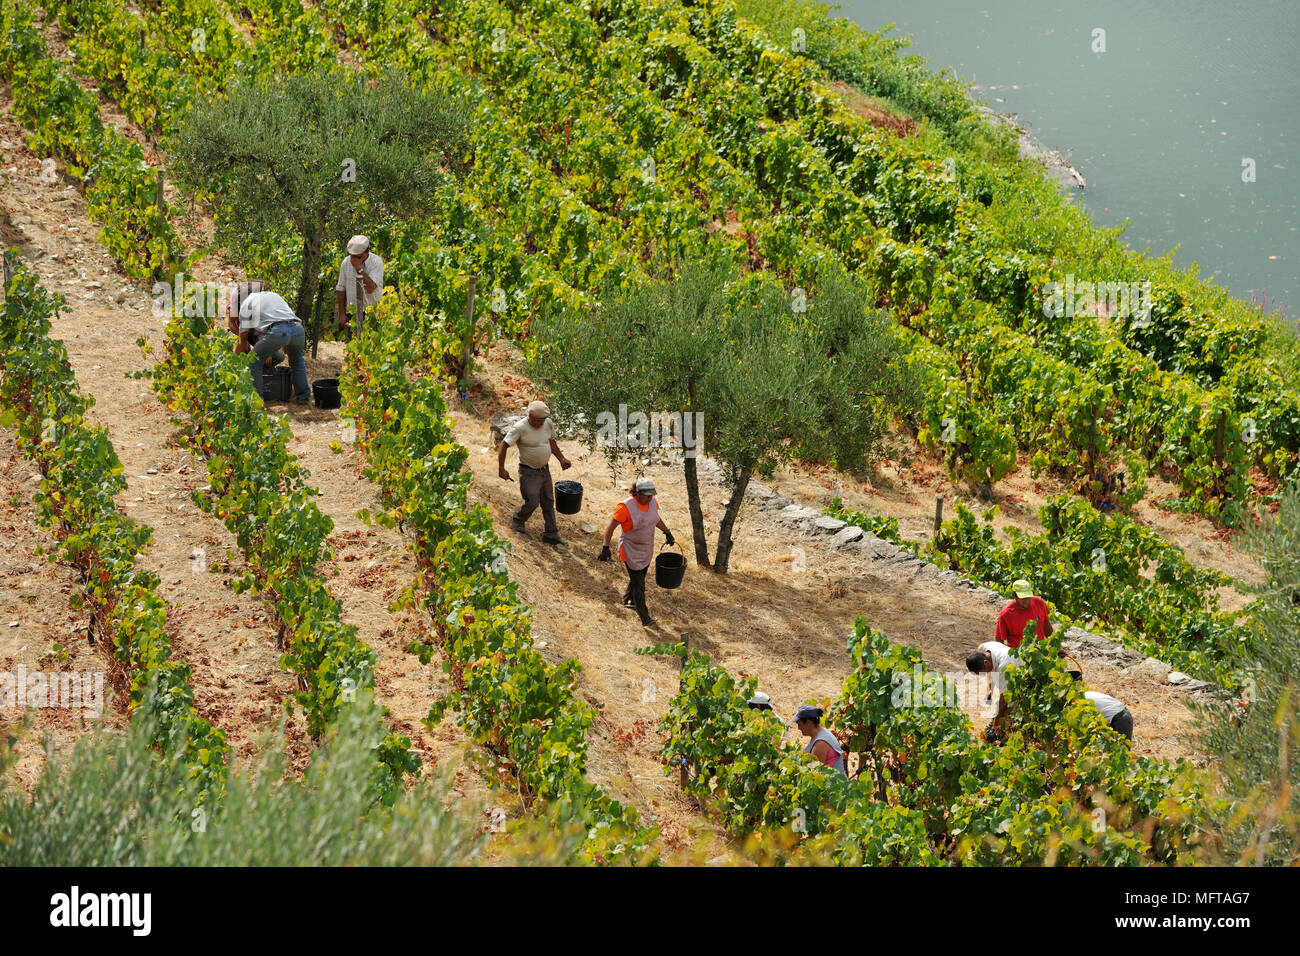 Grapes harvest along the river Tedo, a tributary of the river Douro. Alto Douro, a Unesco World Heritage Site, Portugal Stock Photo